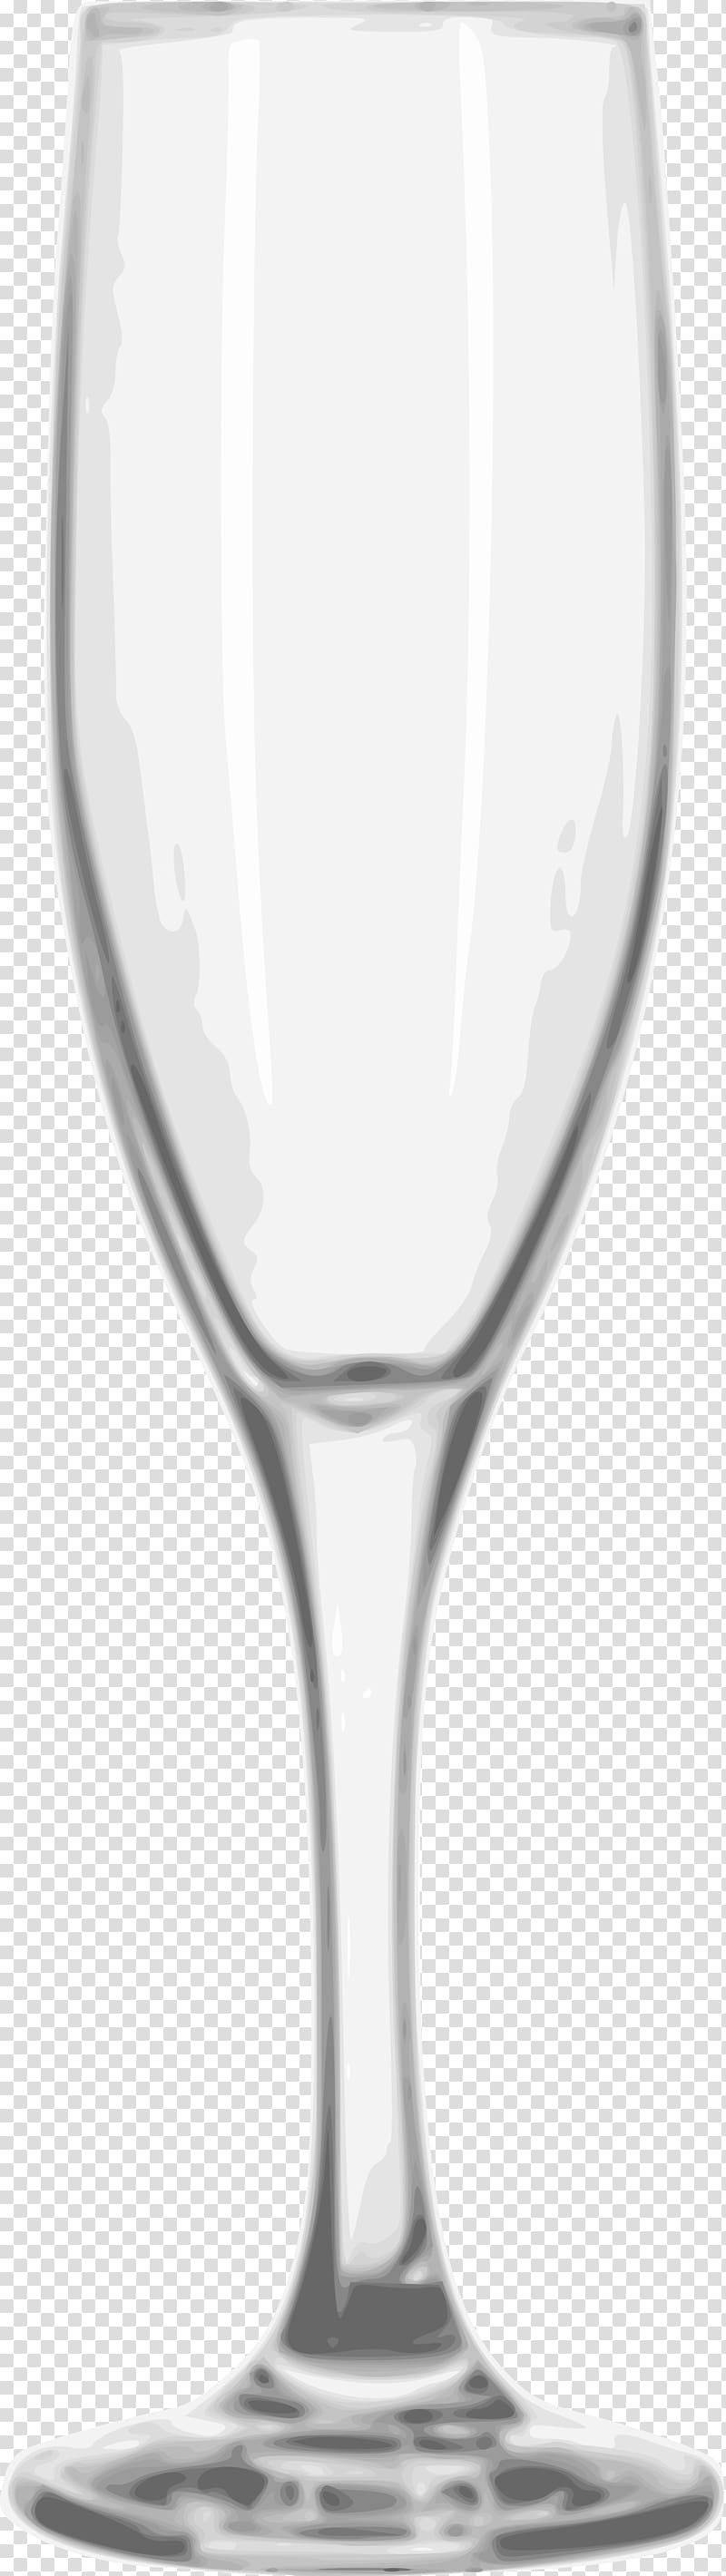 Wine glass Champagne glass, Wineglass transparent background PNG clipart